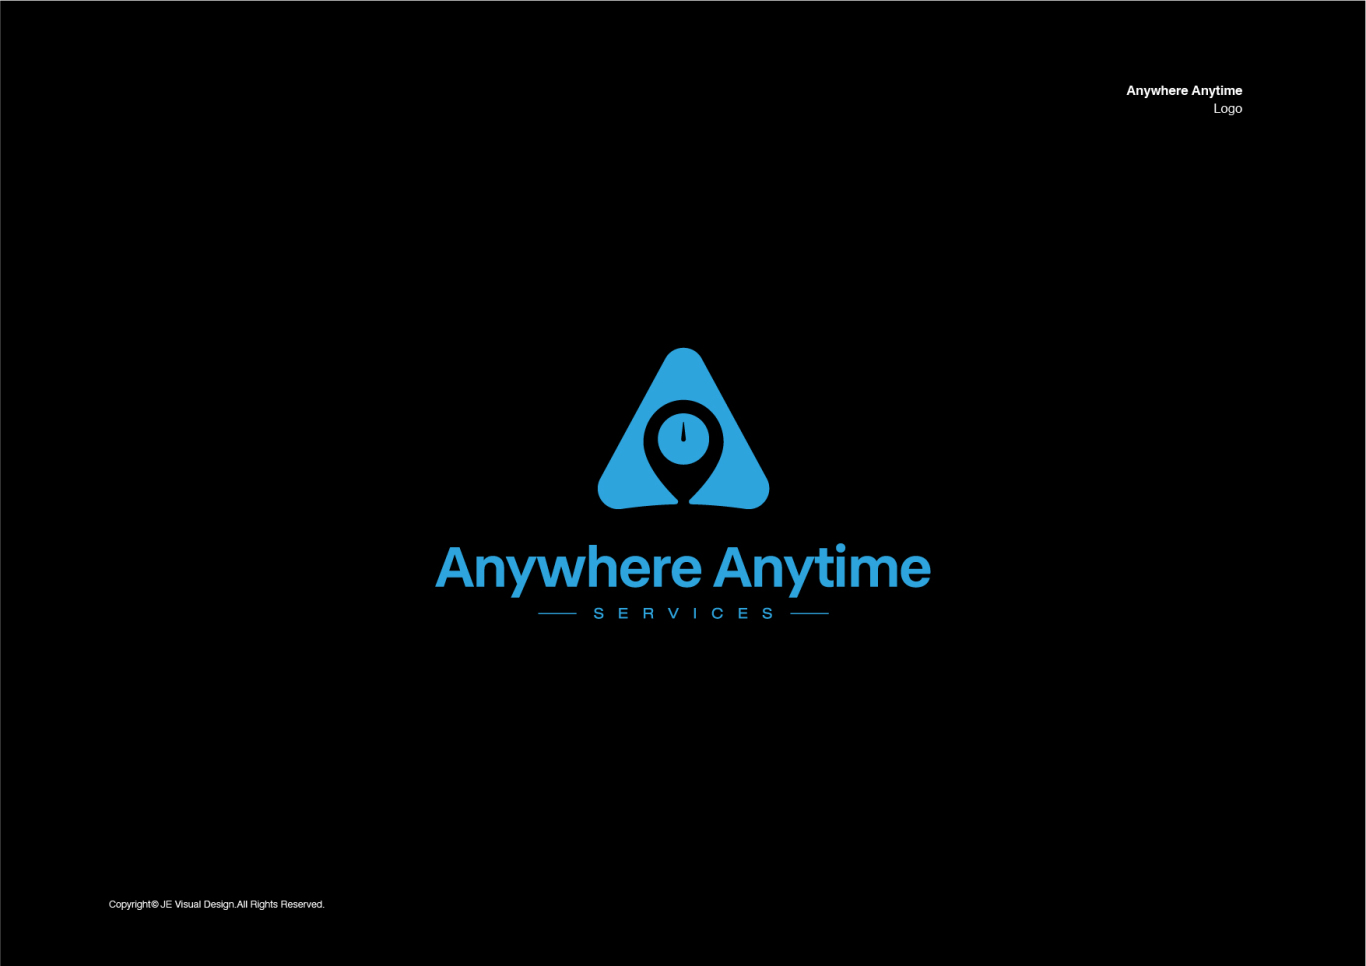 Anywhere Anytime logo设计图6